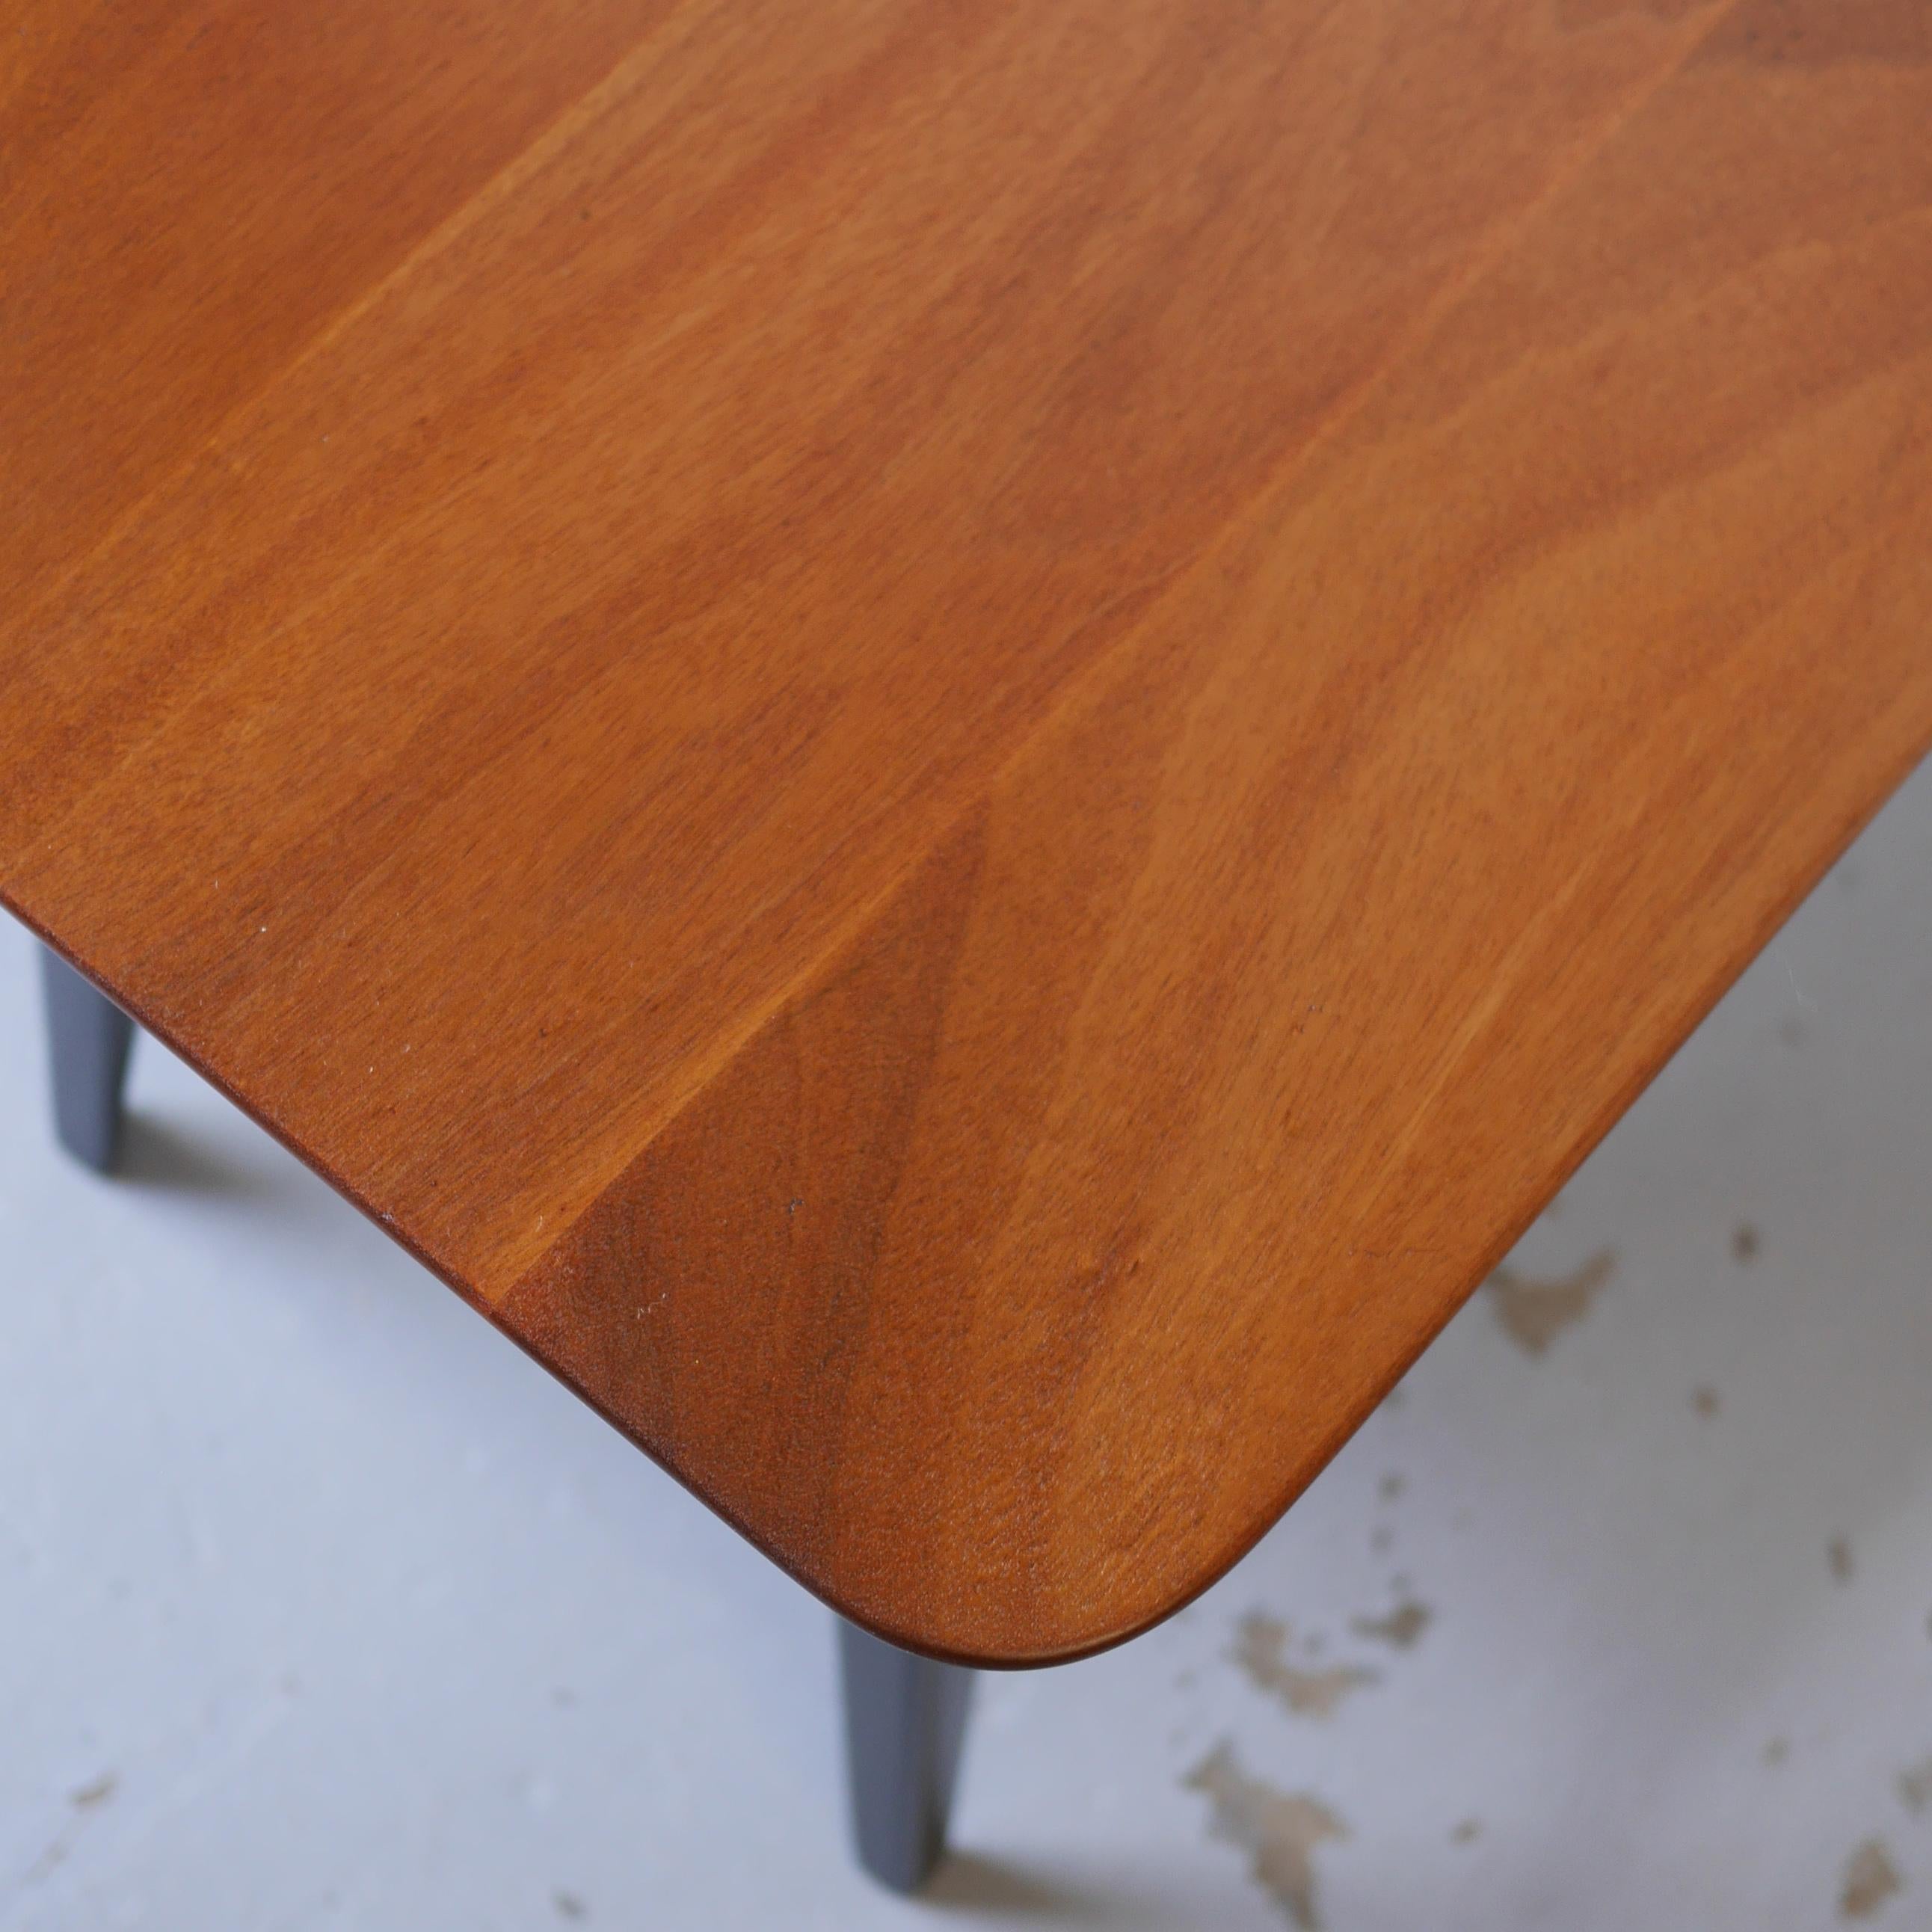 Solid Mahogany Coffee or Lamp Table by Vanson, circa 1955 For Sale 1